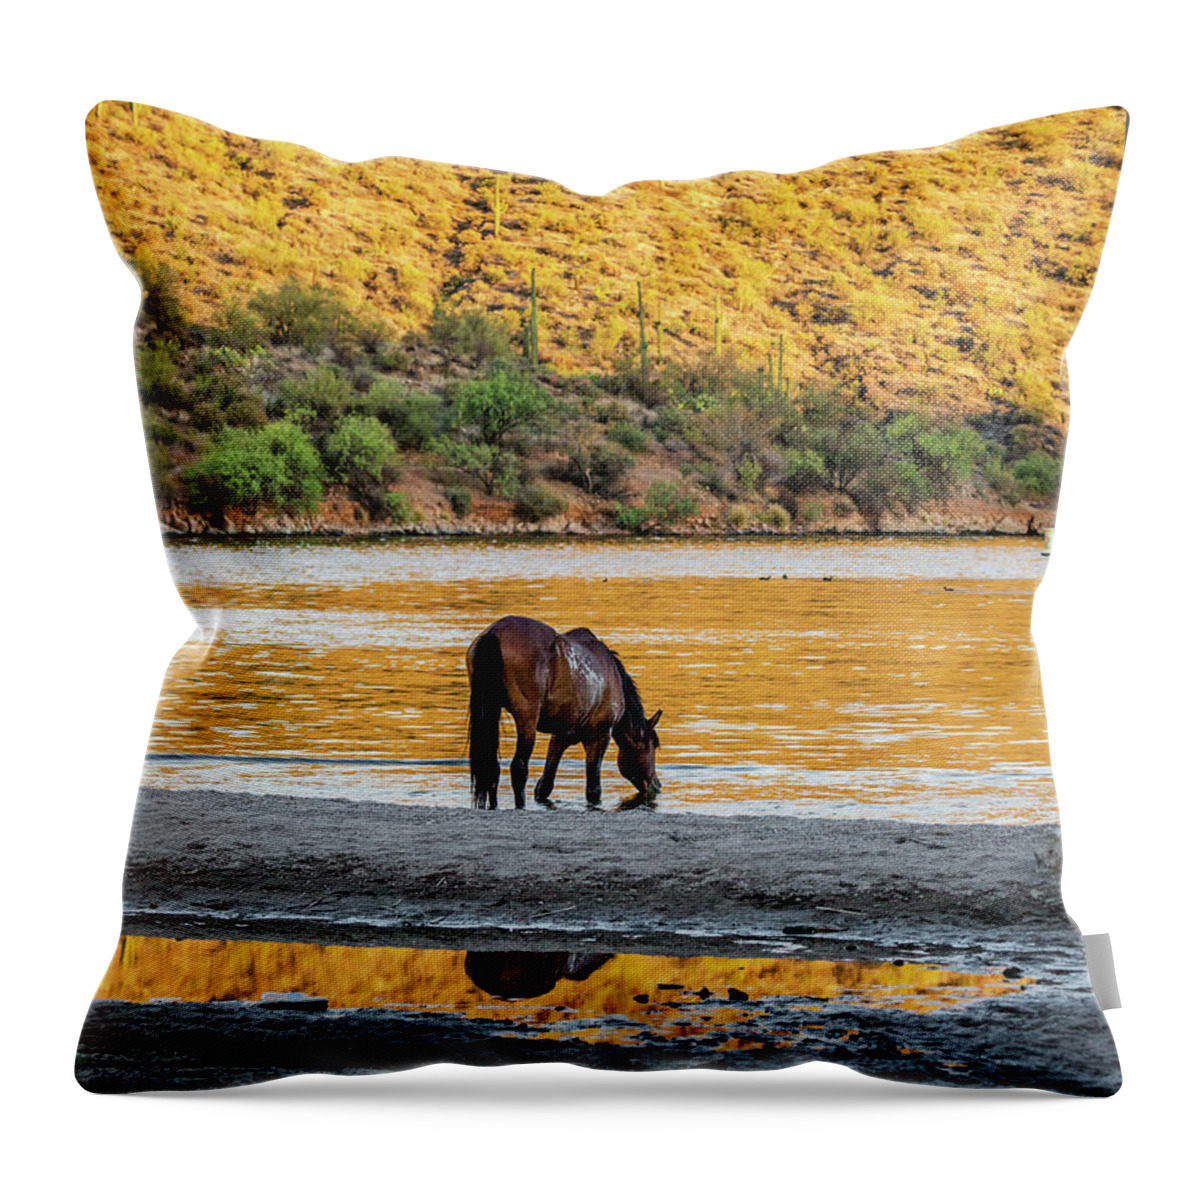 Equine Throw Pillow featuring the photograph Wild Horse Drinking Water From River by Good Focused